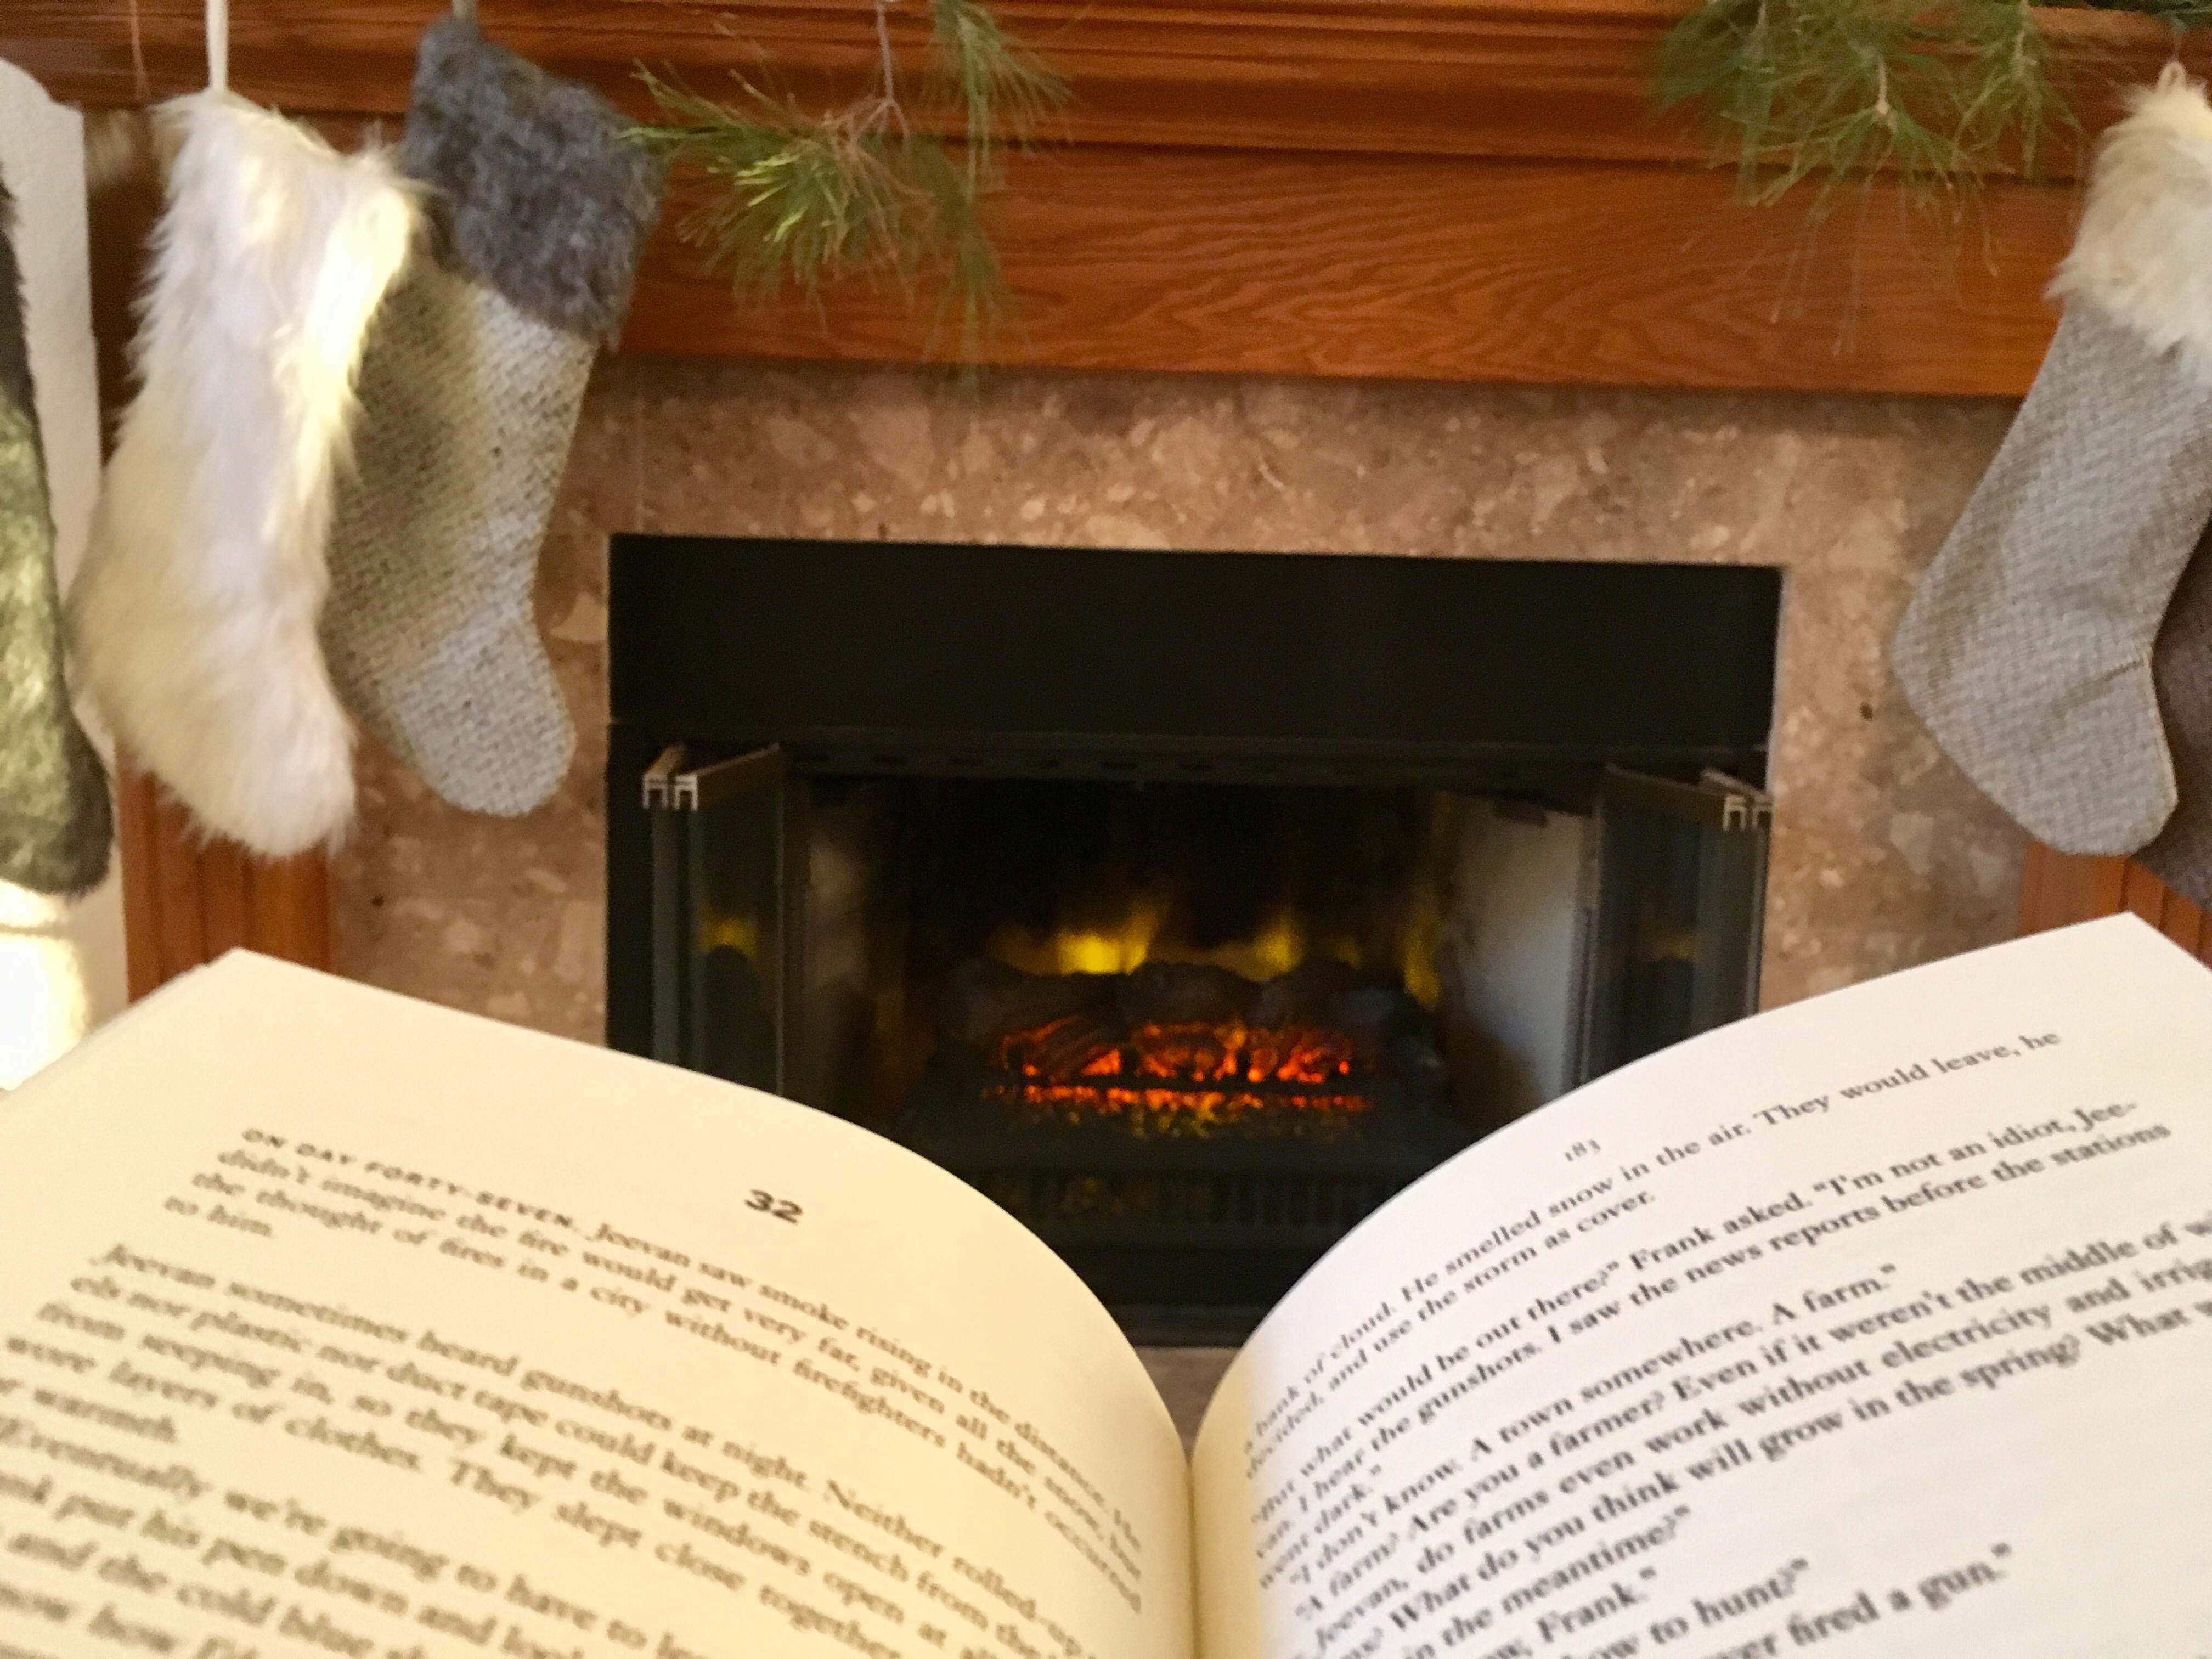 Open book sitting in front of fireplace with Christmas stockings